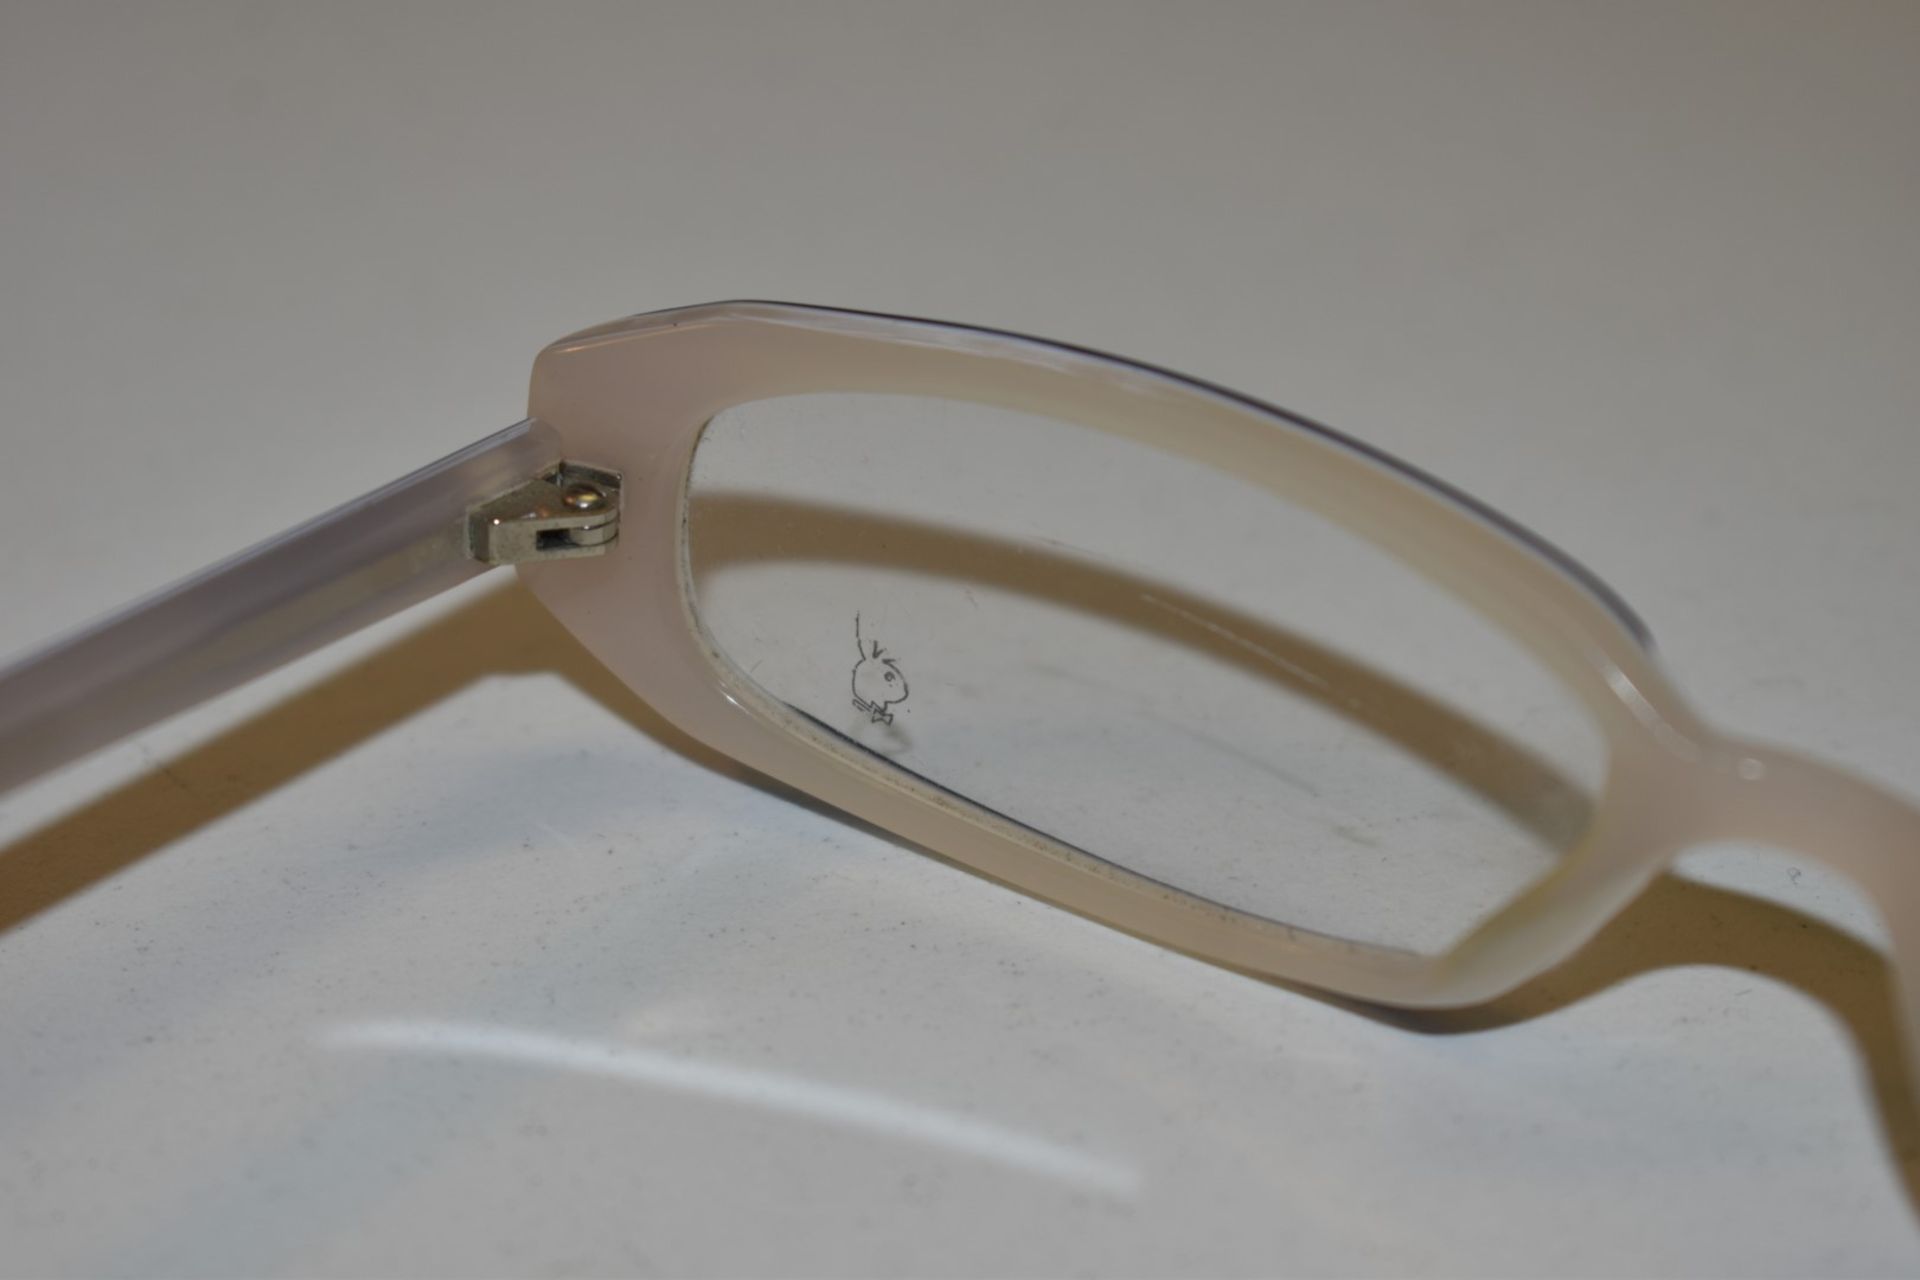 1 x Genuine PLAYBOY Spectacle Eye Glasses Frame - Ex Display Stock  - Ref: GTI178 - CL645 - - Image 11 of 12